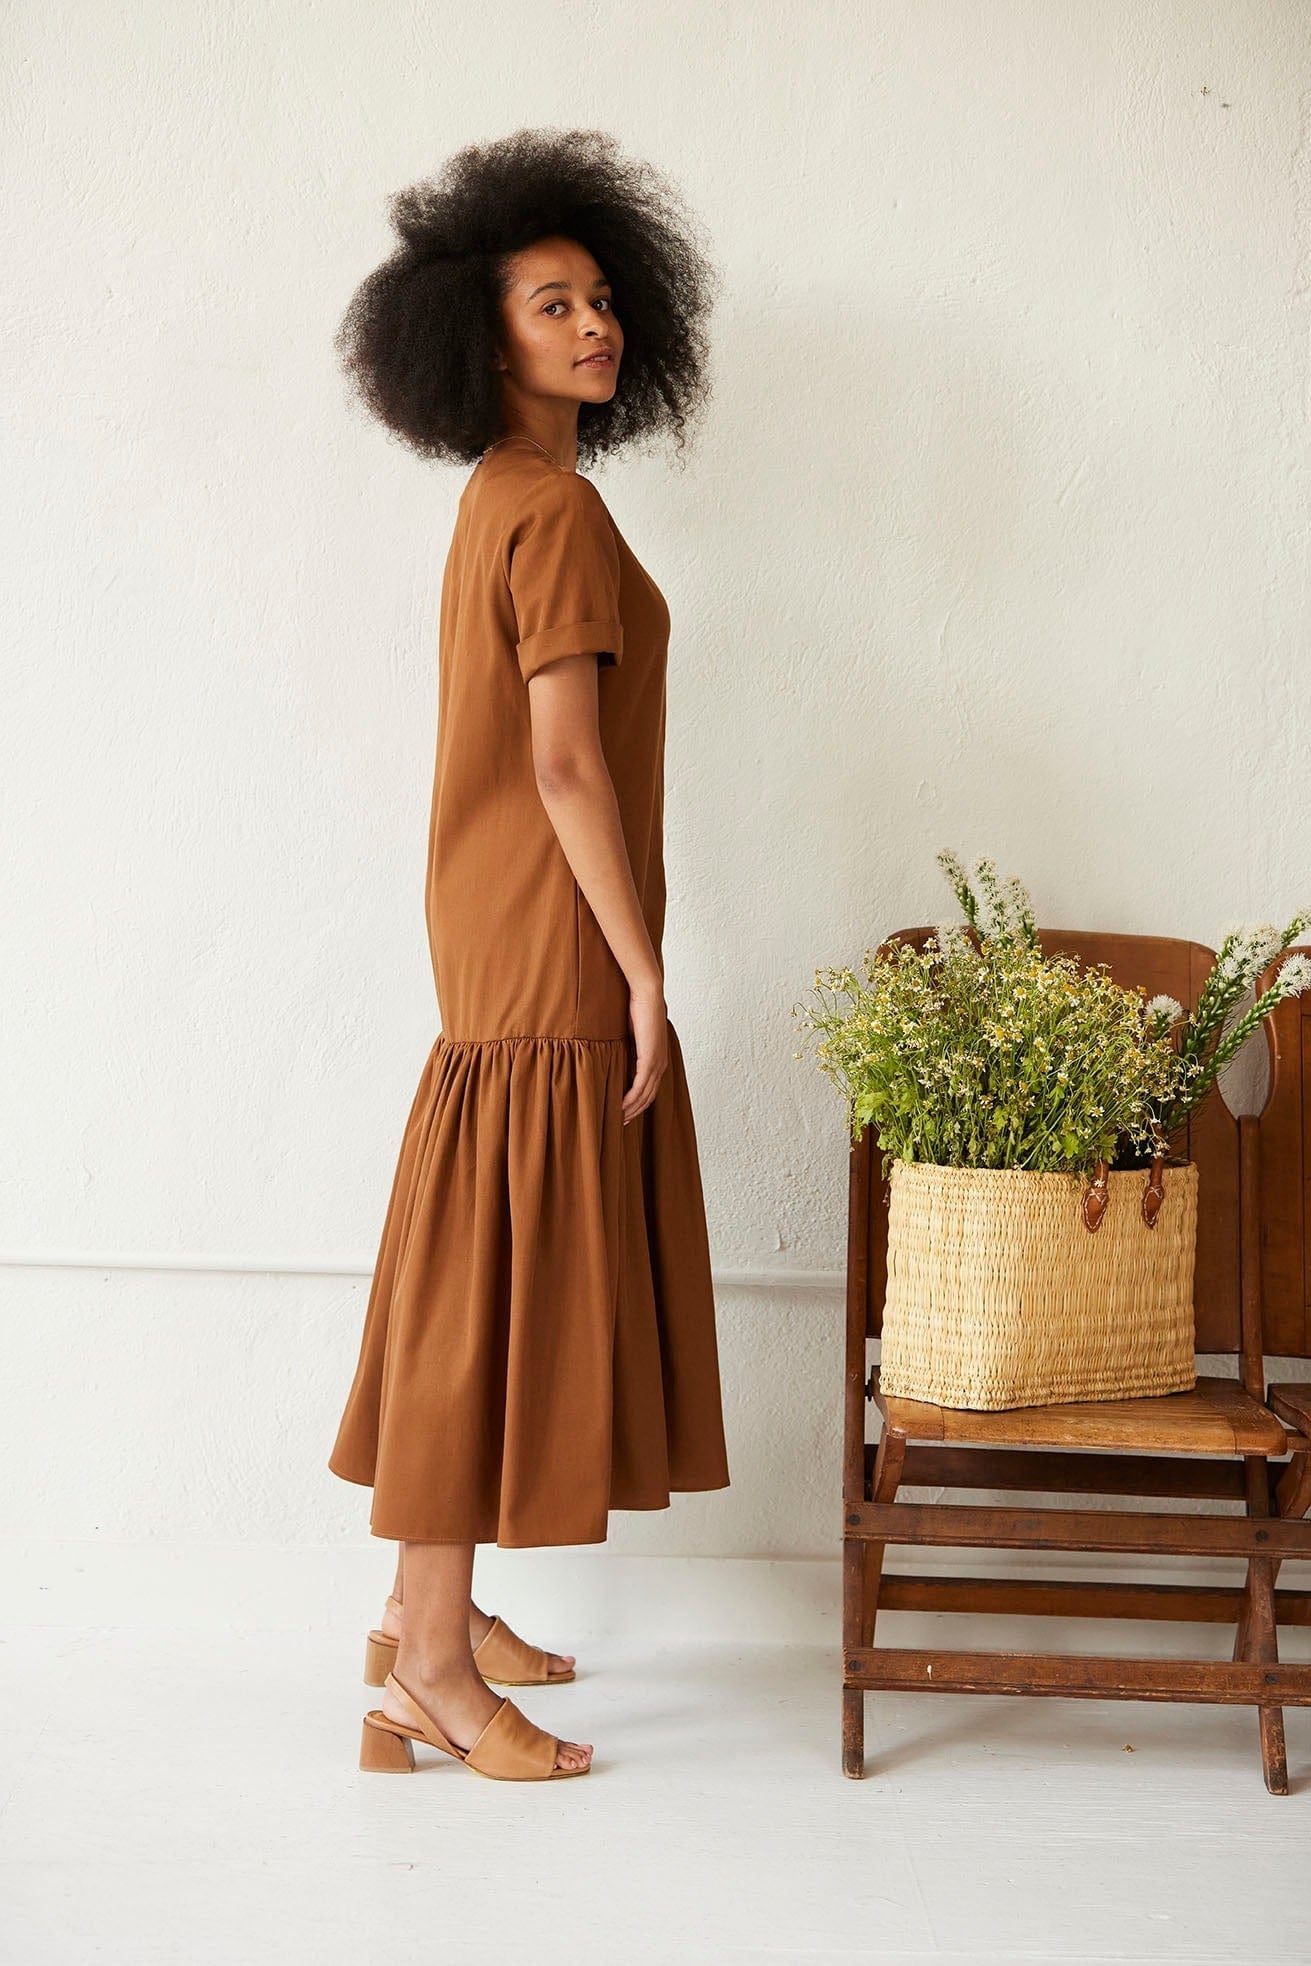 Aly Dress in Tencel Cotton Dresses CHRISTINE ALCALAY   